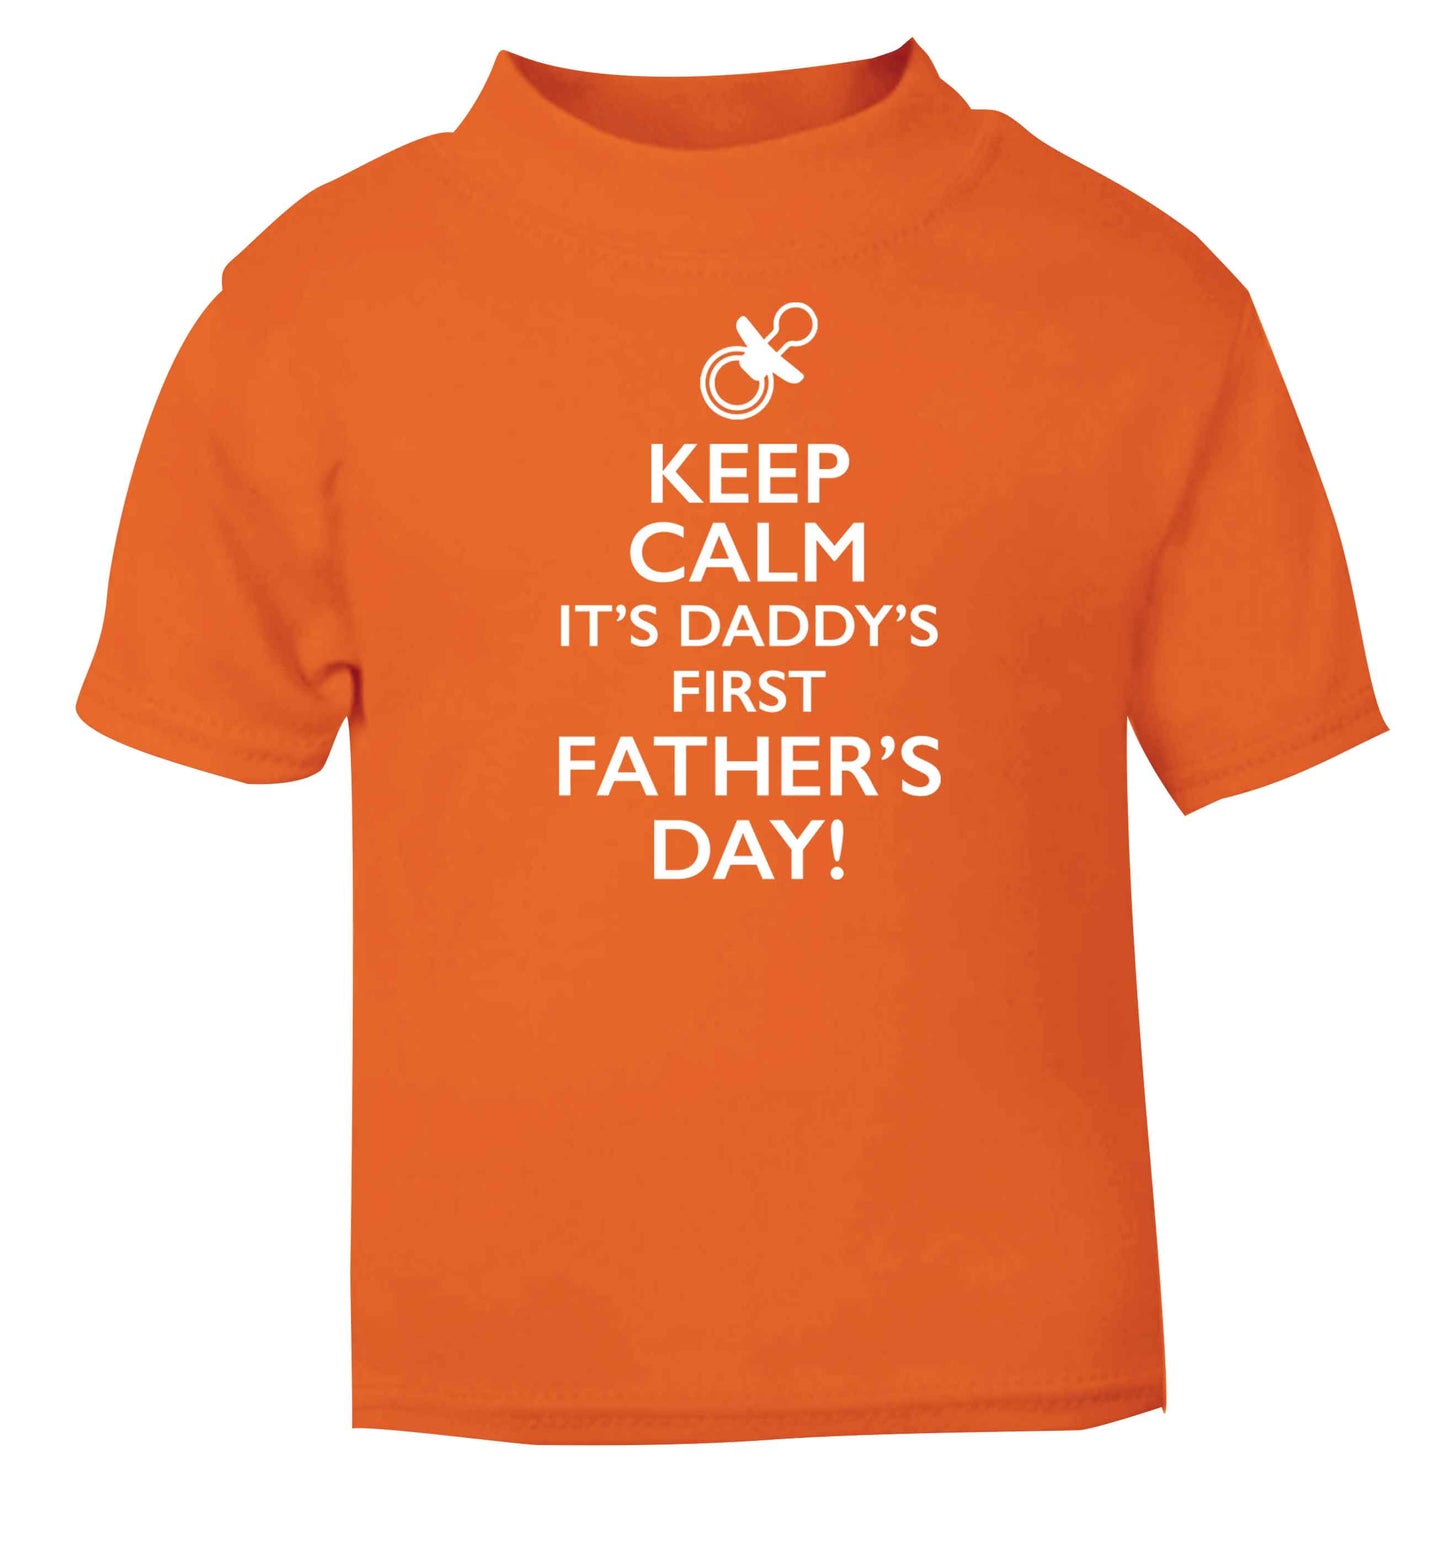 Keep calm it's daddys first father's day orange baby toddler Tshirt 2 Years